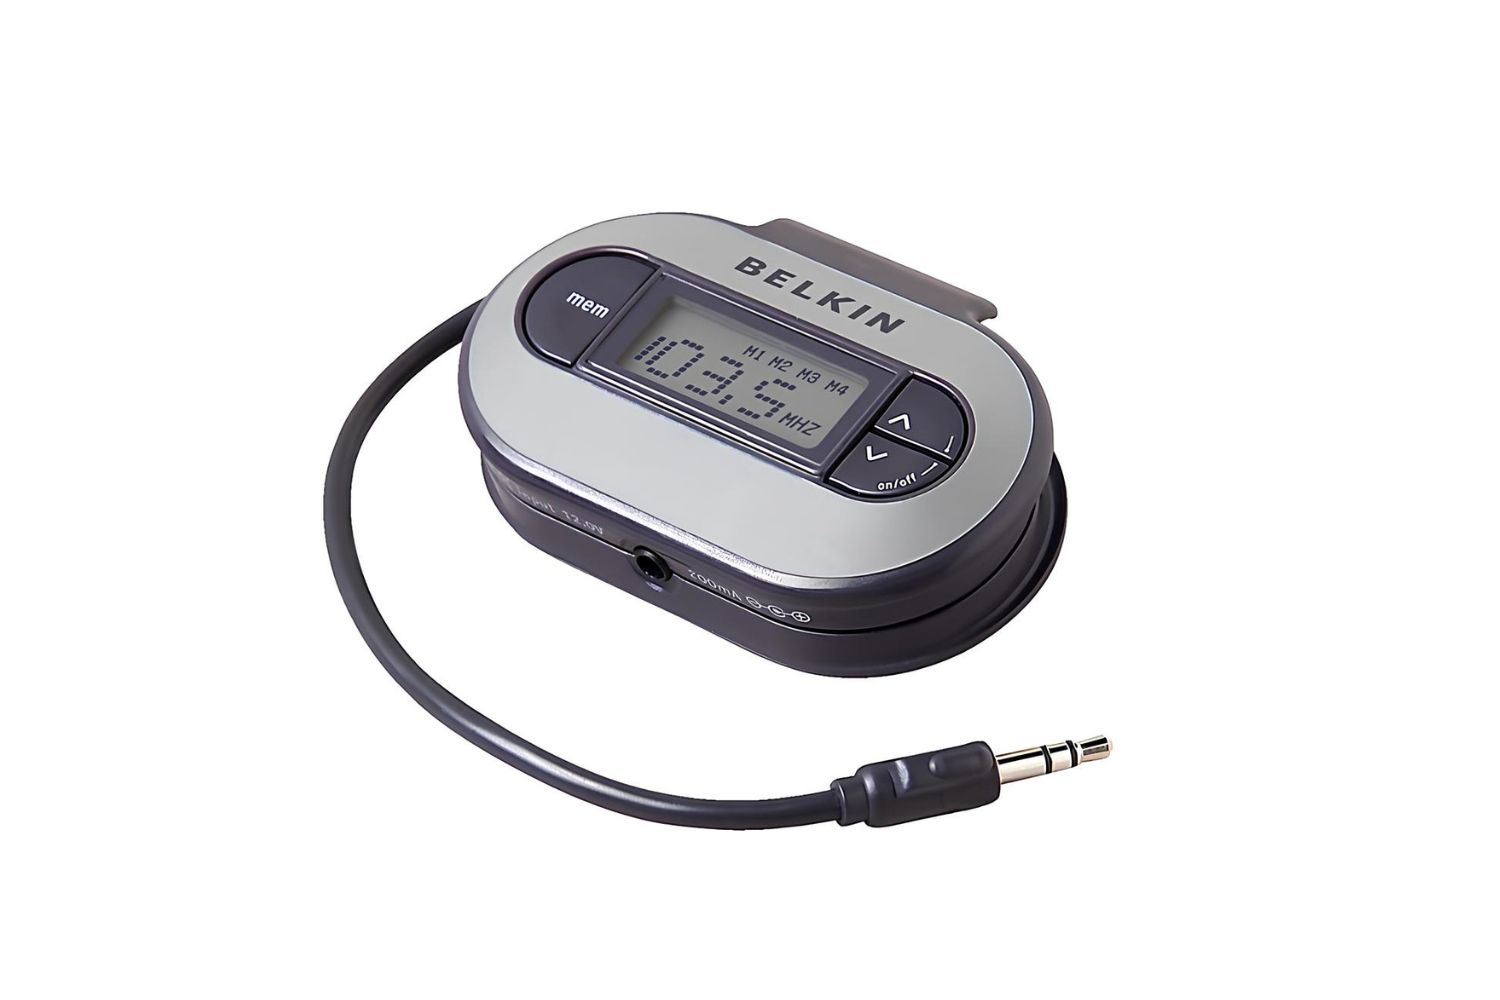 Belkin FM Transmitter Guide: Maximizing Utility With Easy Steps